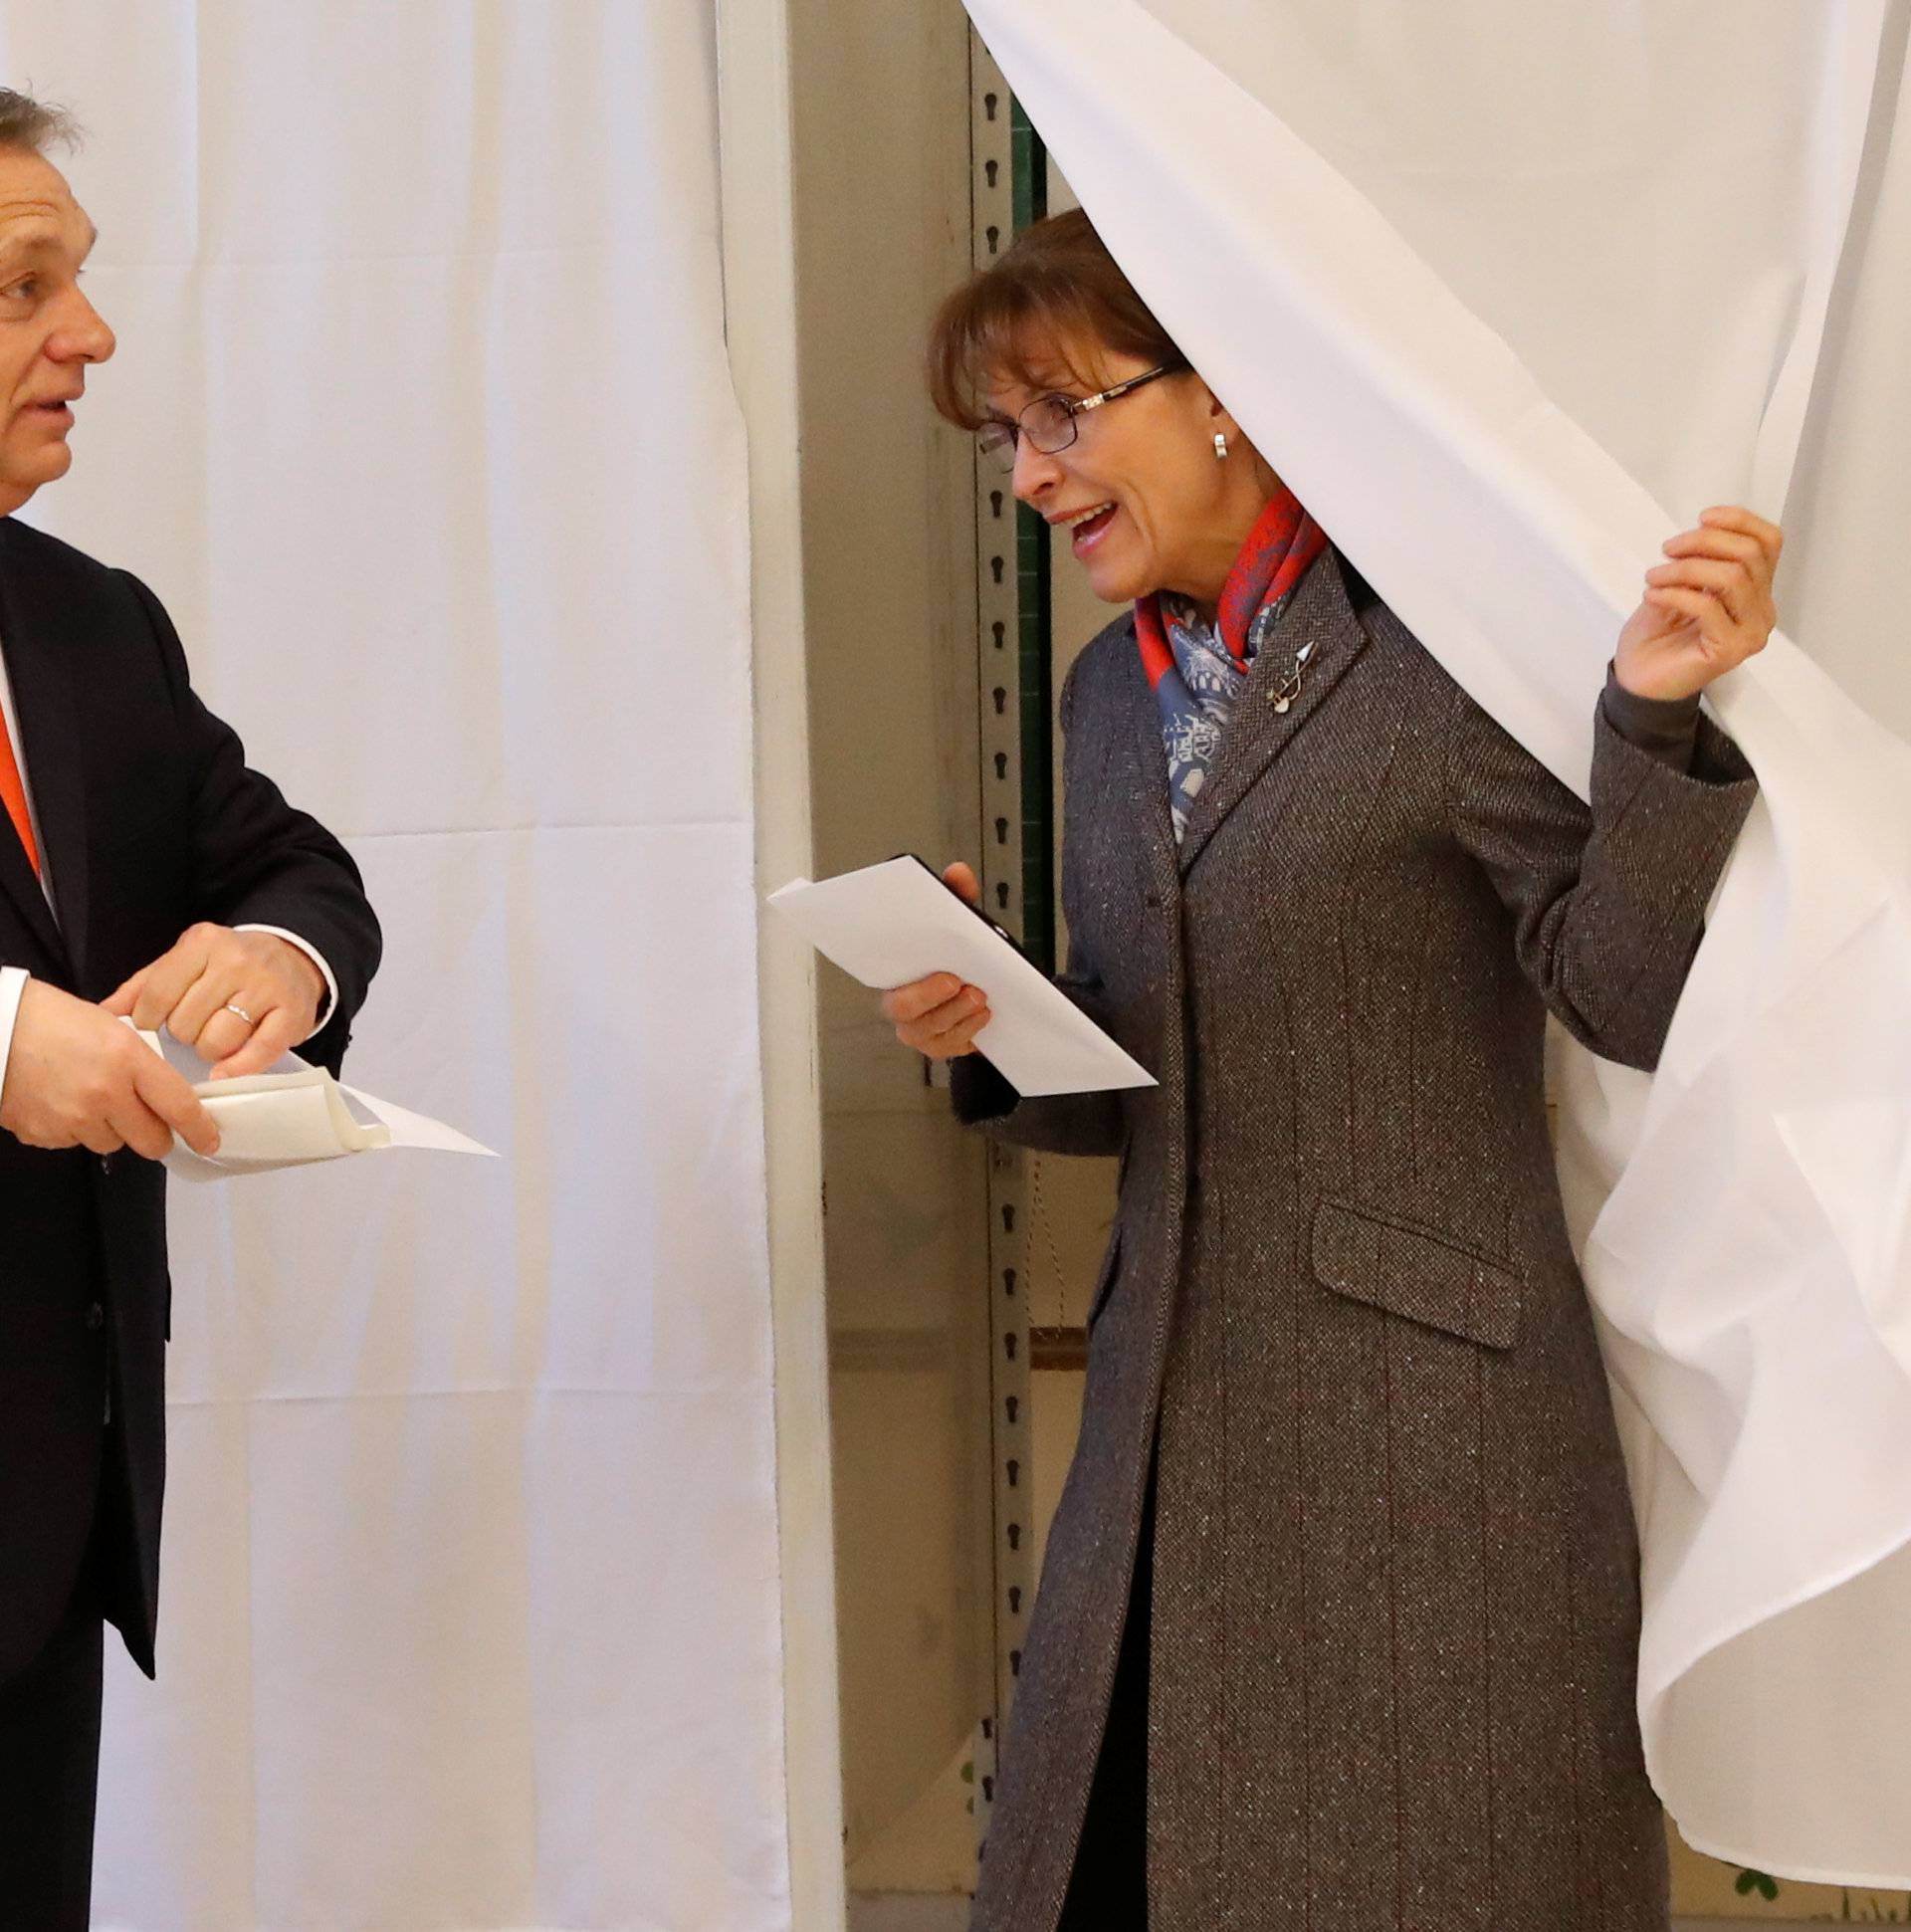 Current Hungarian Prime Minister Viktor Orban and his wife Aniko Levai leave a polling booth to cast their ballots during Hungarian parliamentary election in Budapest